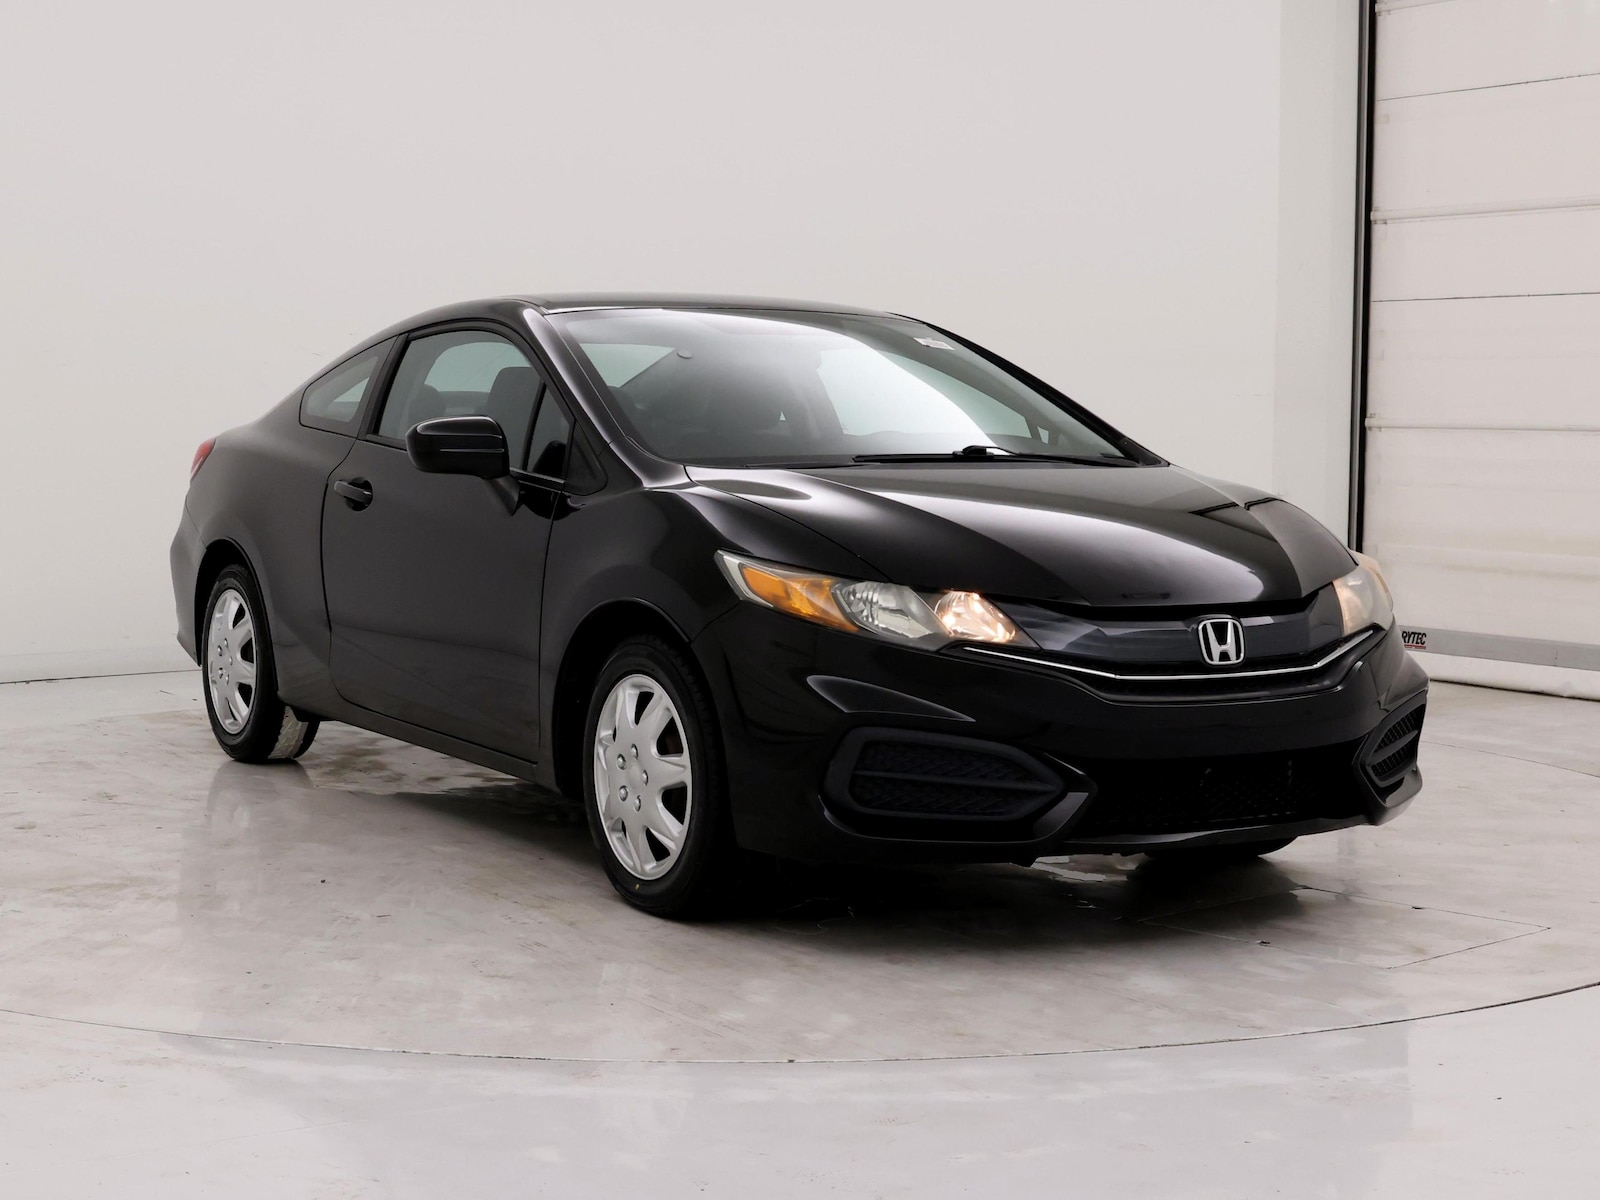 Used 2014 Honda Civic LX with VIN 2HGFG3B54EH524367 for sale in Kenosha, WI